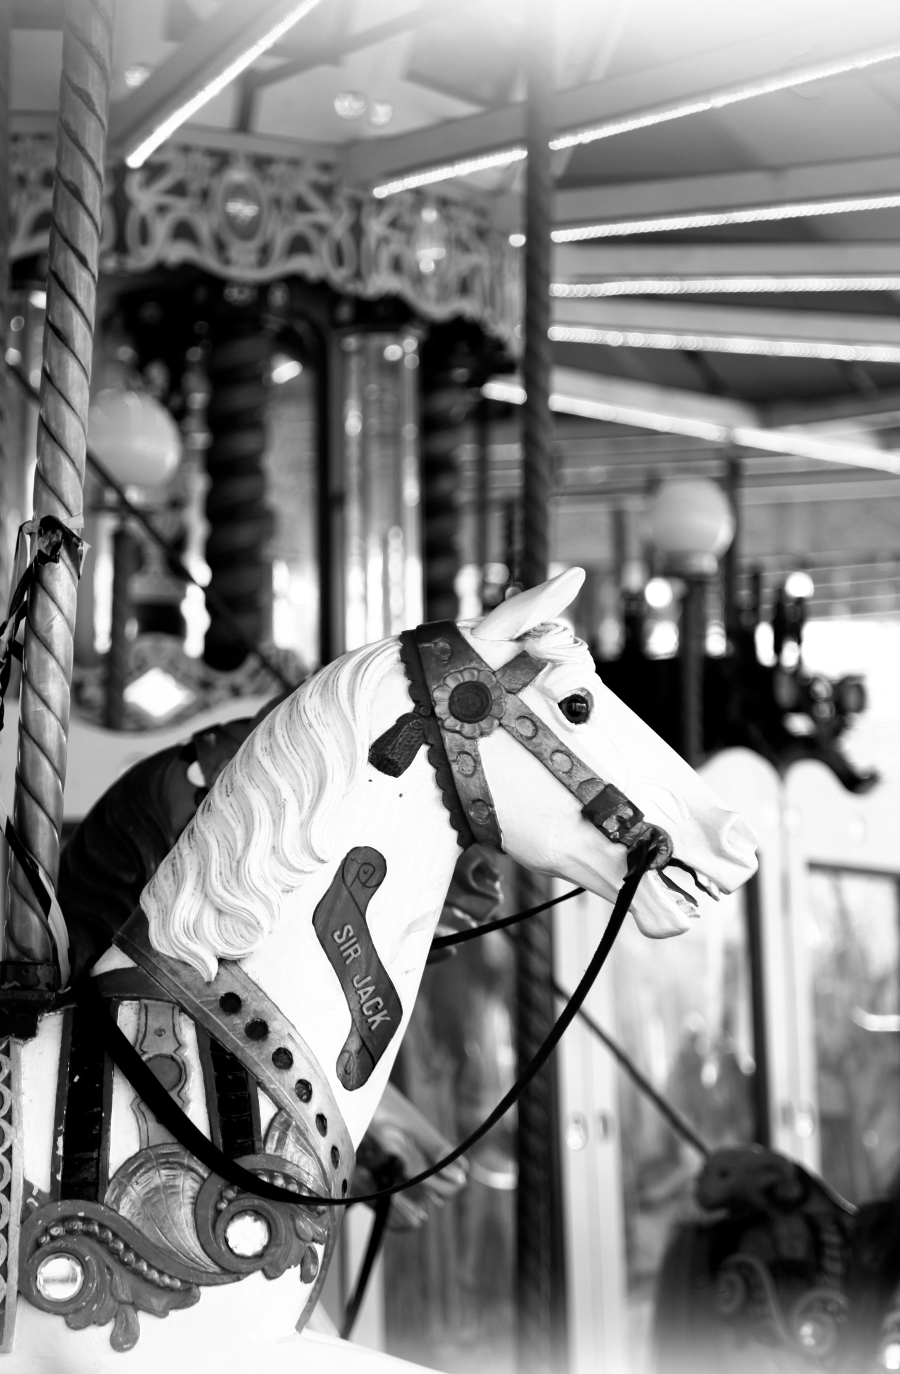 Merry Go Round • Canberra Carousel Black and White Photography Print Artwork